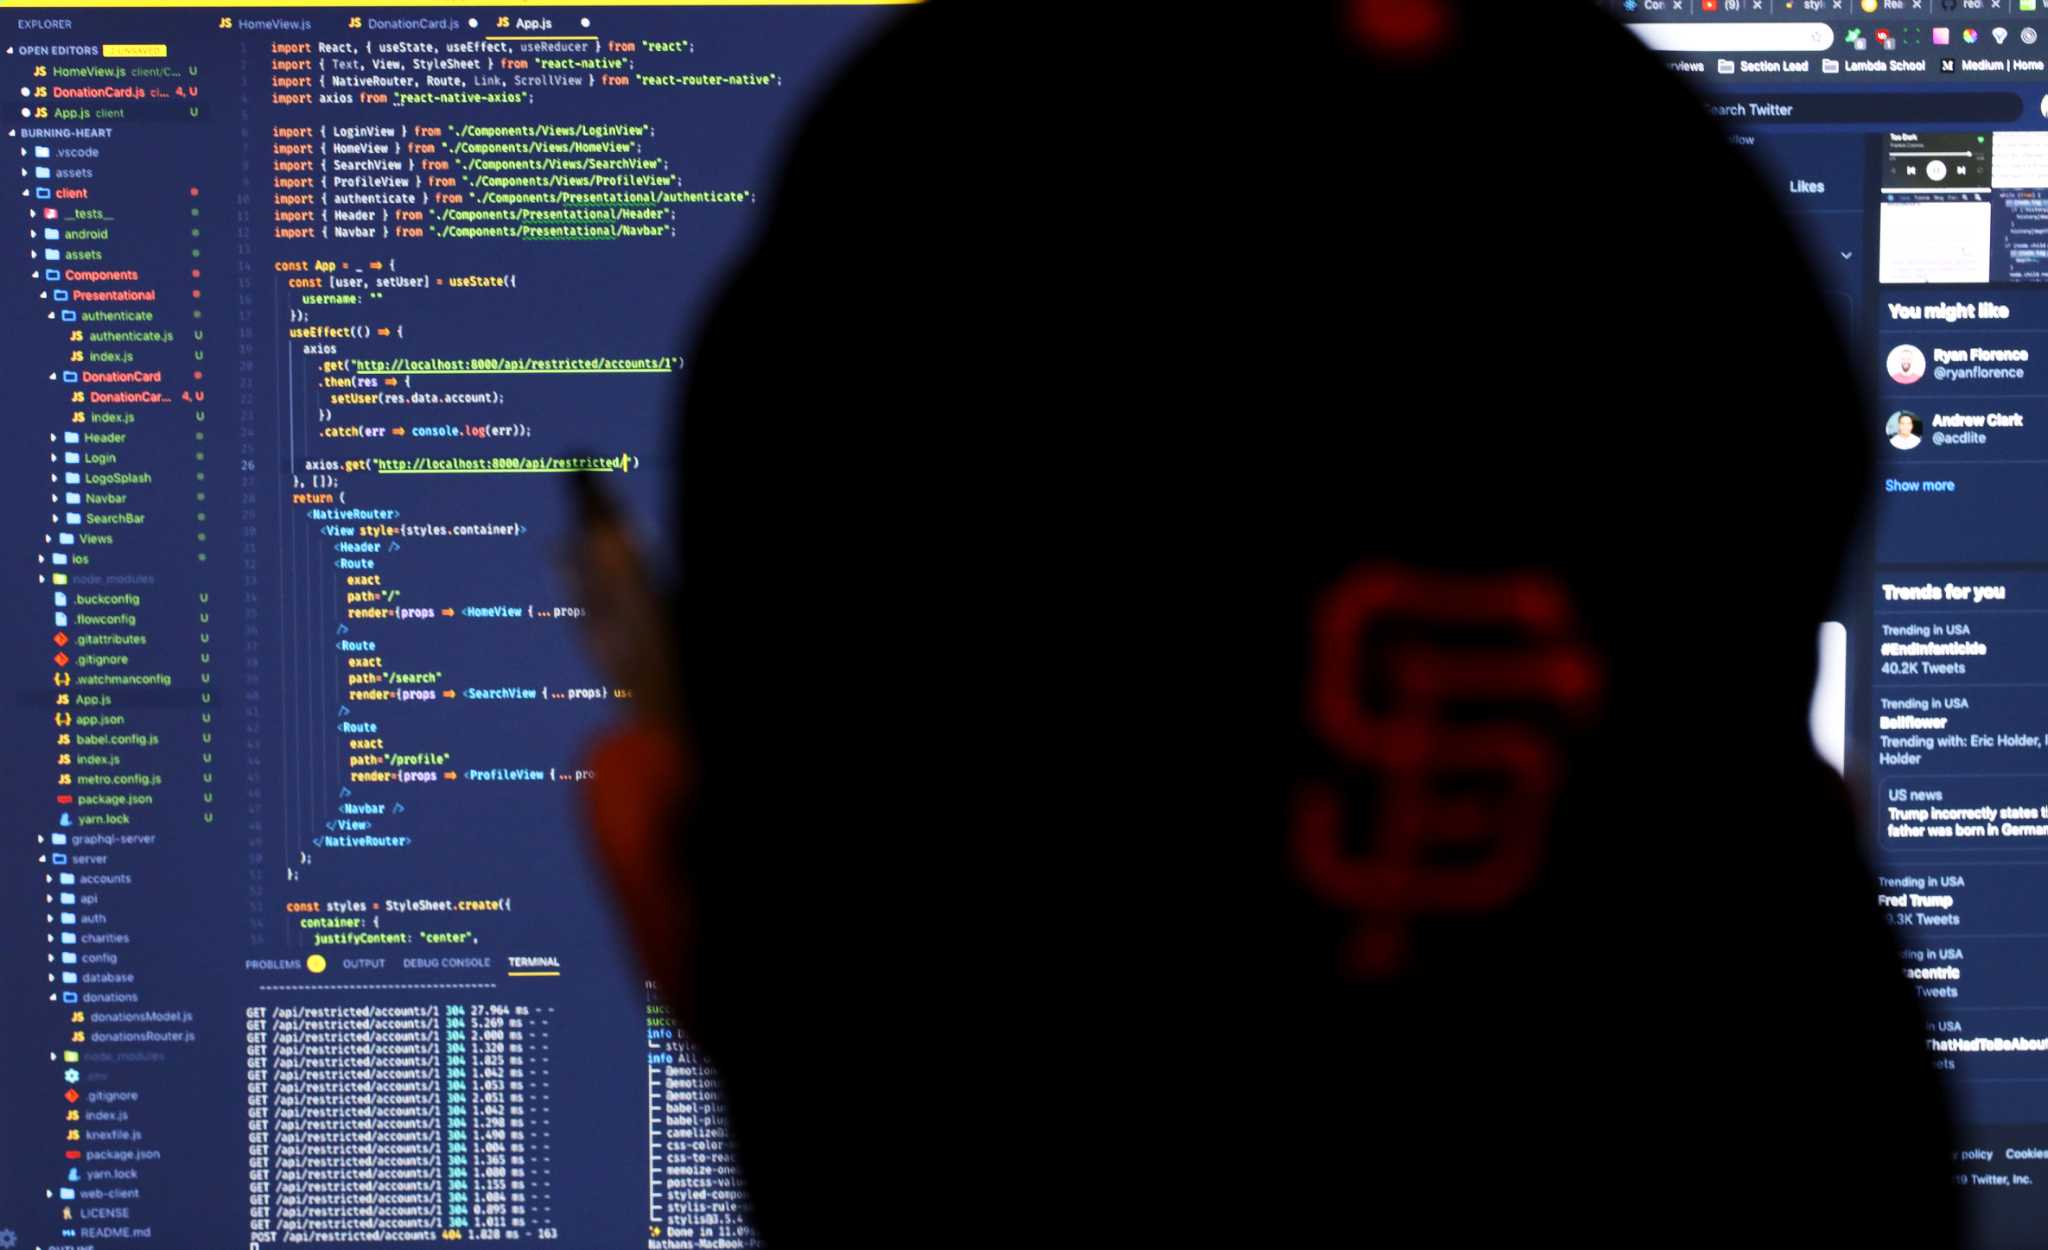 SF code company hit with potential lawsuit